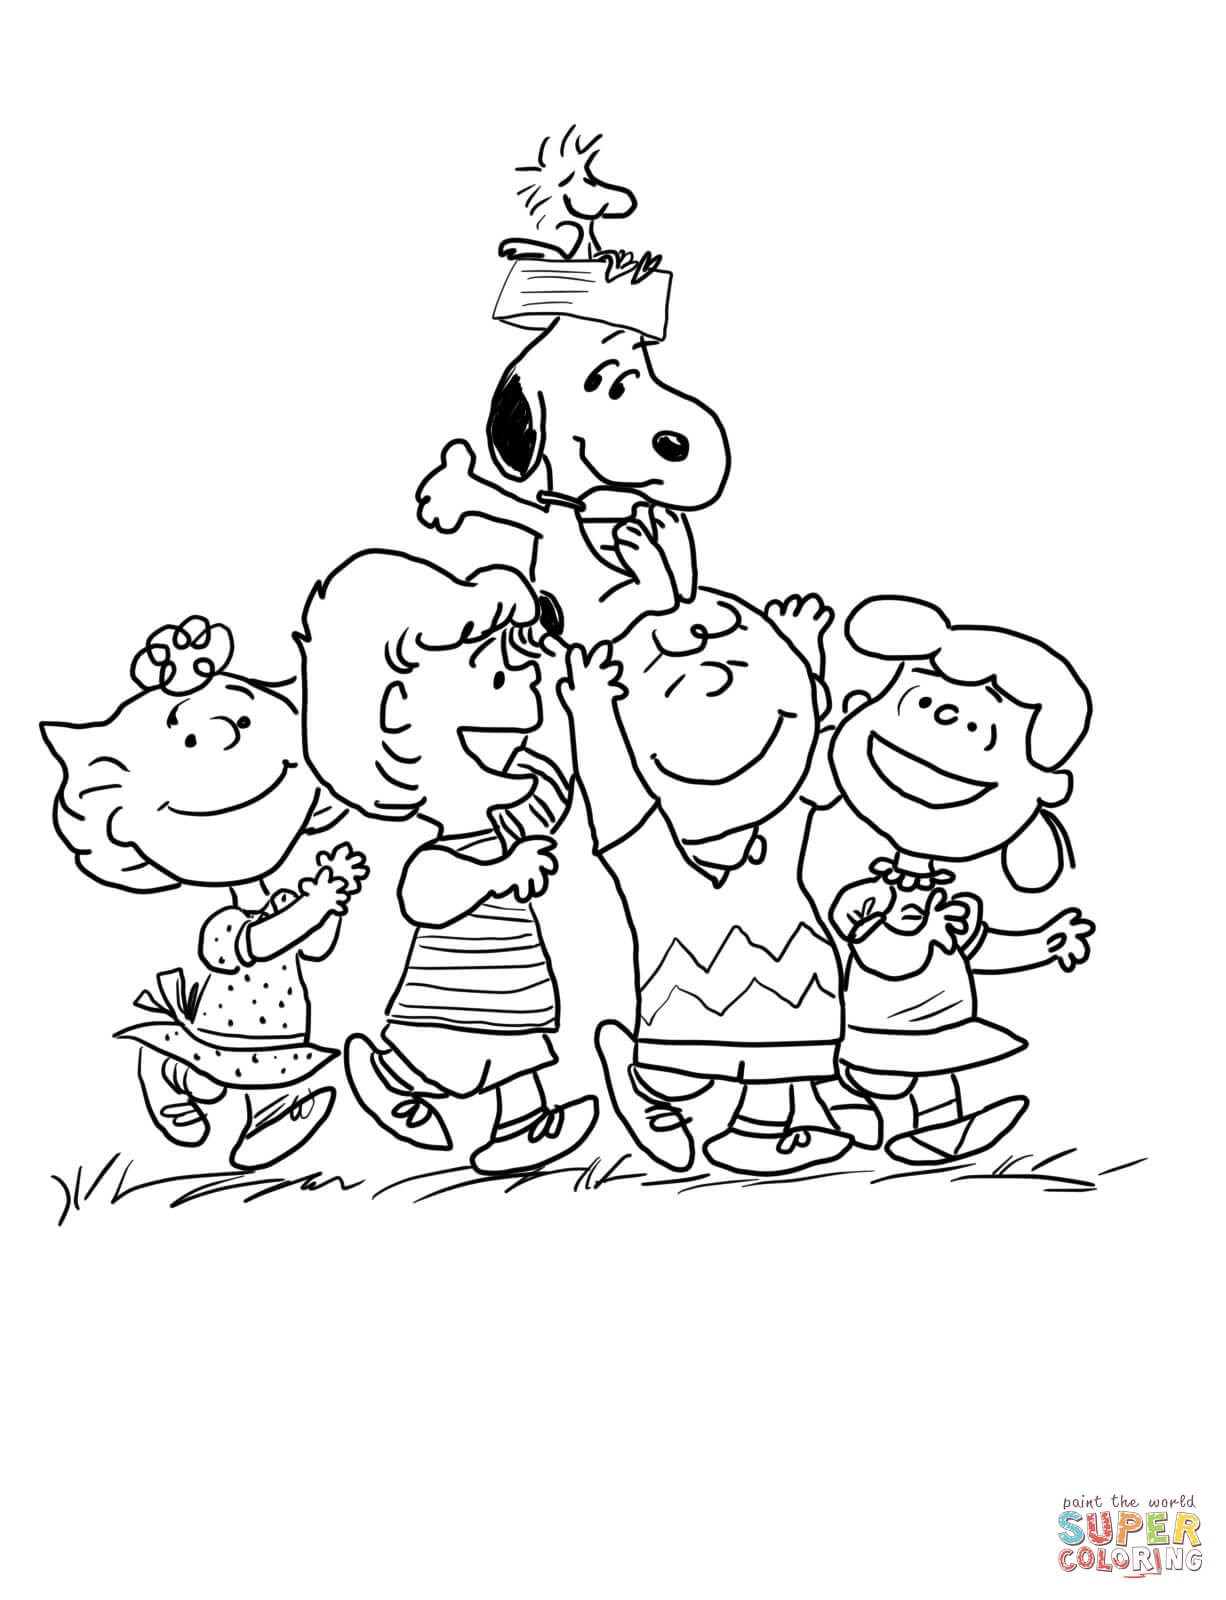 Printable Snoopy Coloring Pages
 Woodstock Coloring Pages at GetColorings